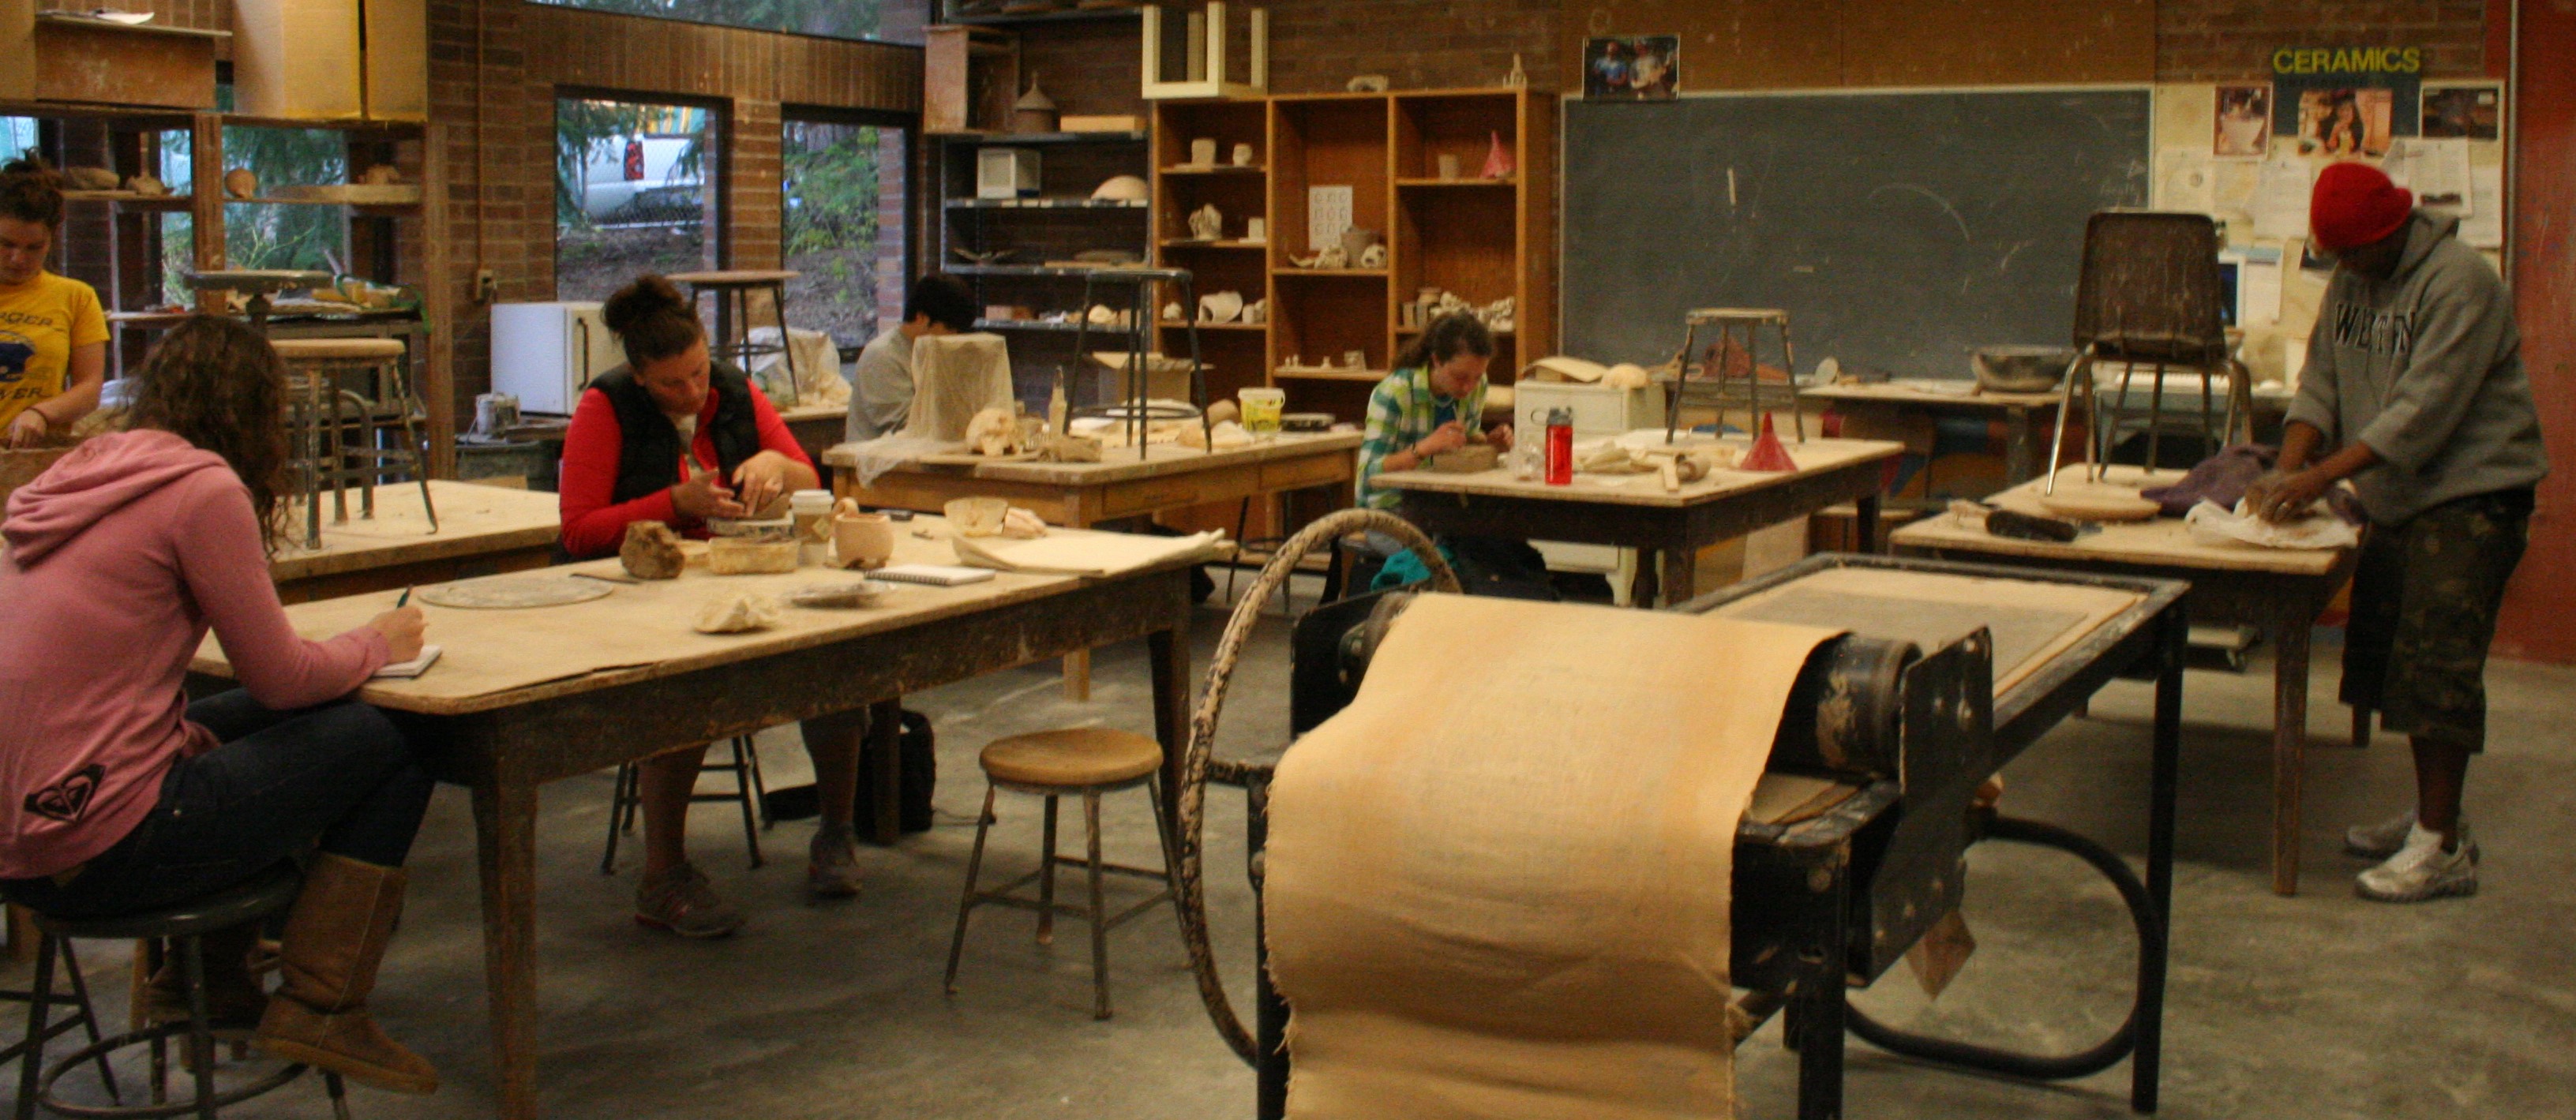 students working individually on clay projects at tables in a well-used studio space